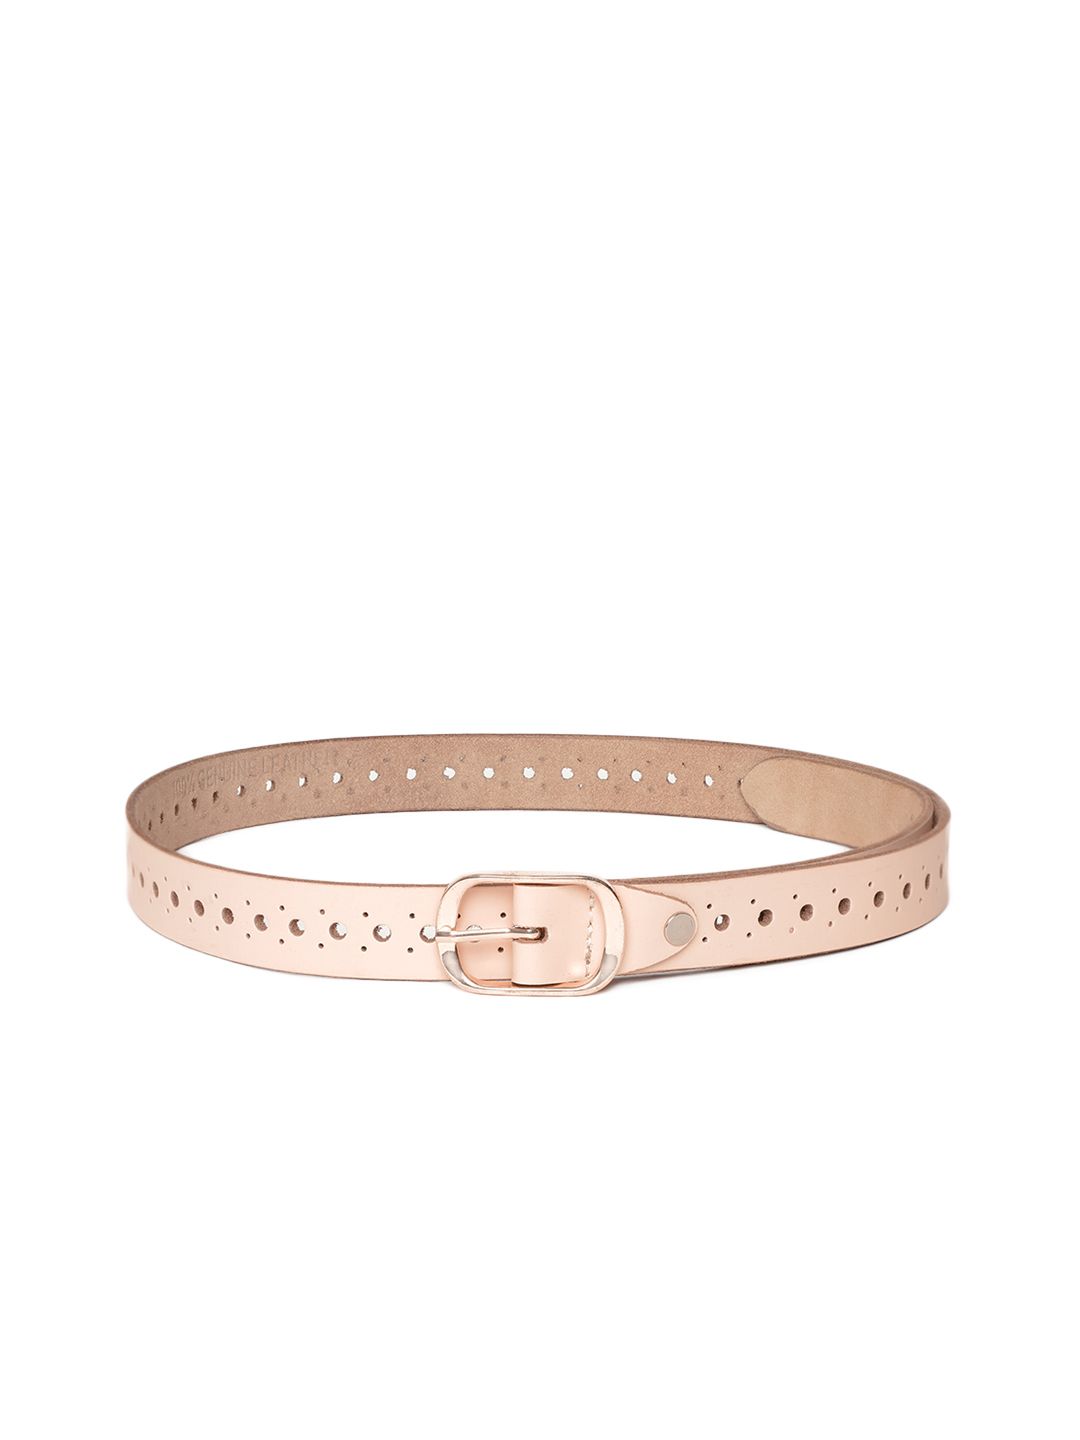 Mast & Harbour Women Light Peach-Coloured Cut-Work Leather Belt Price in India